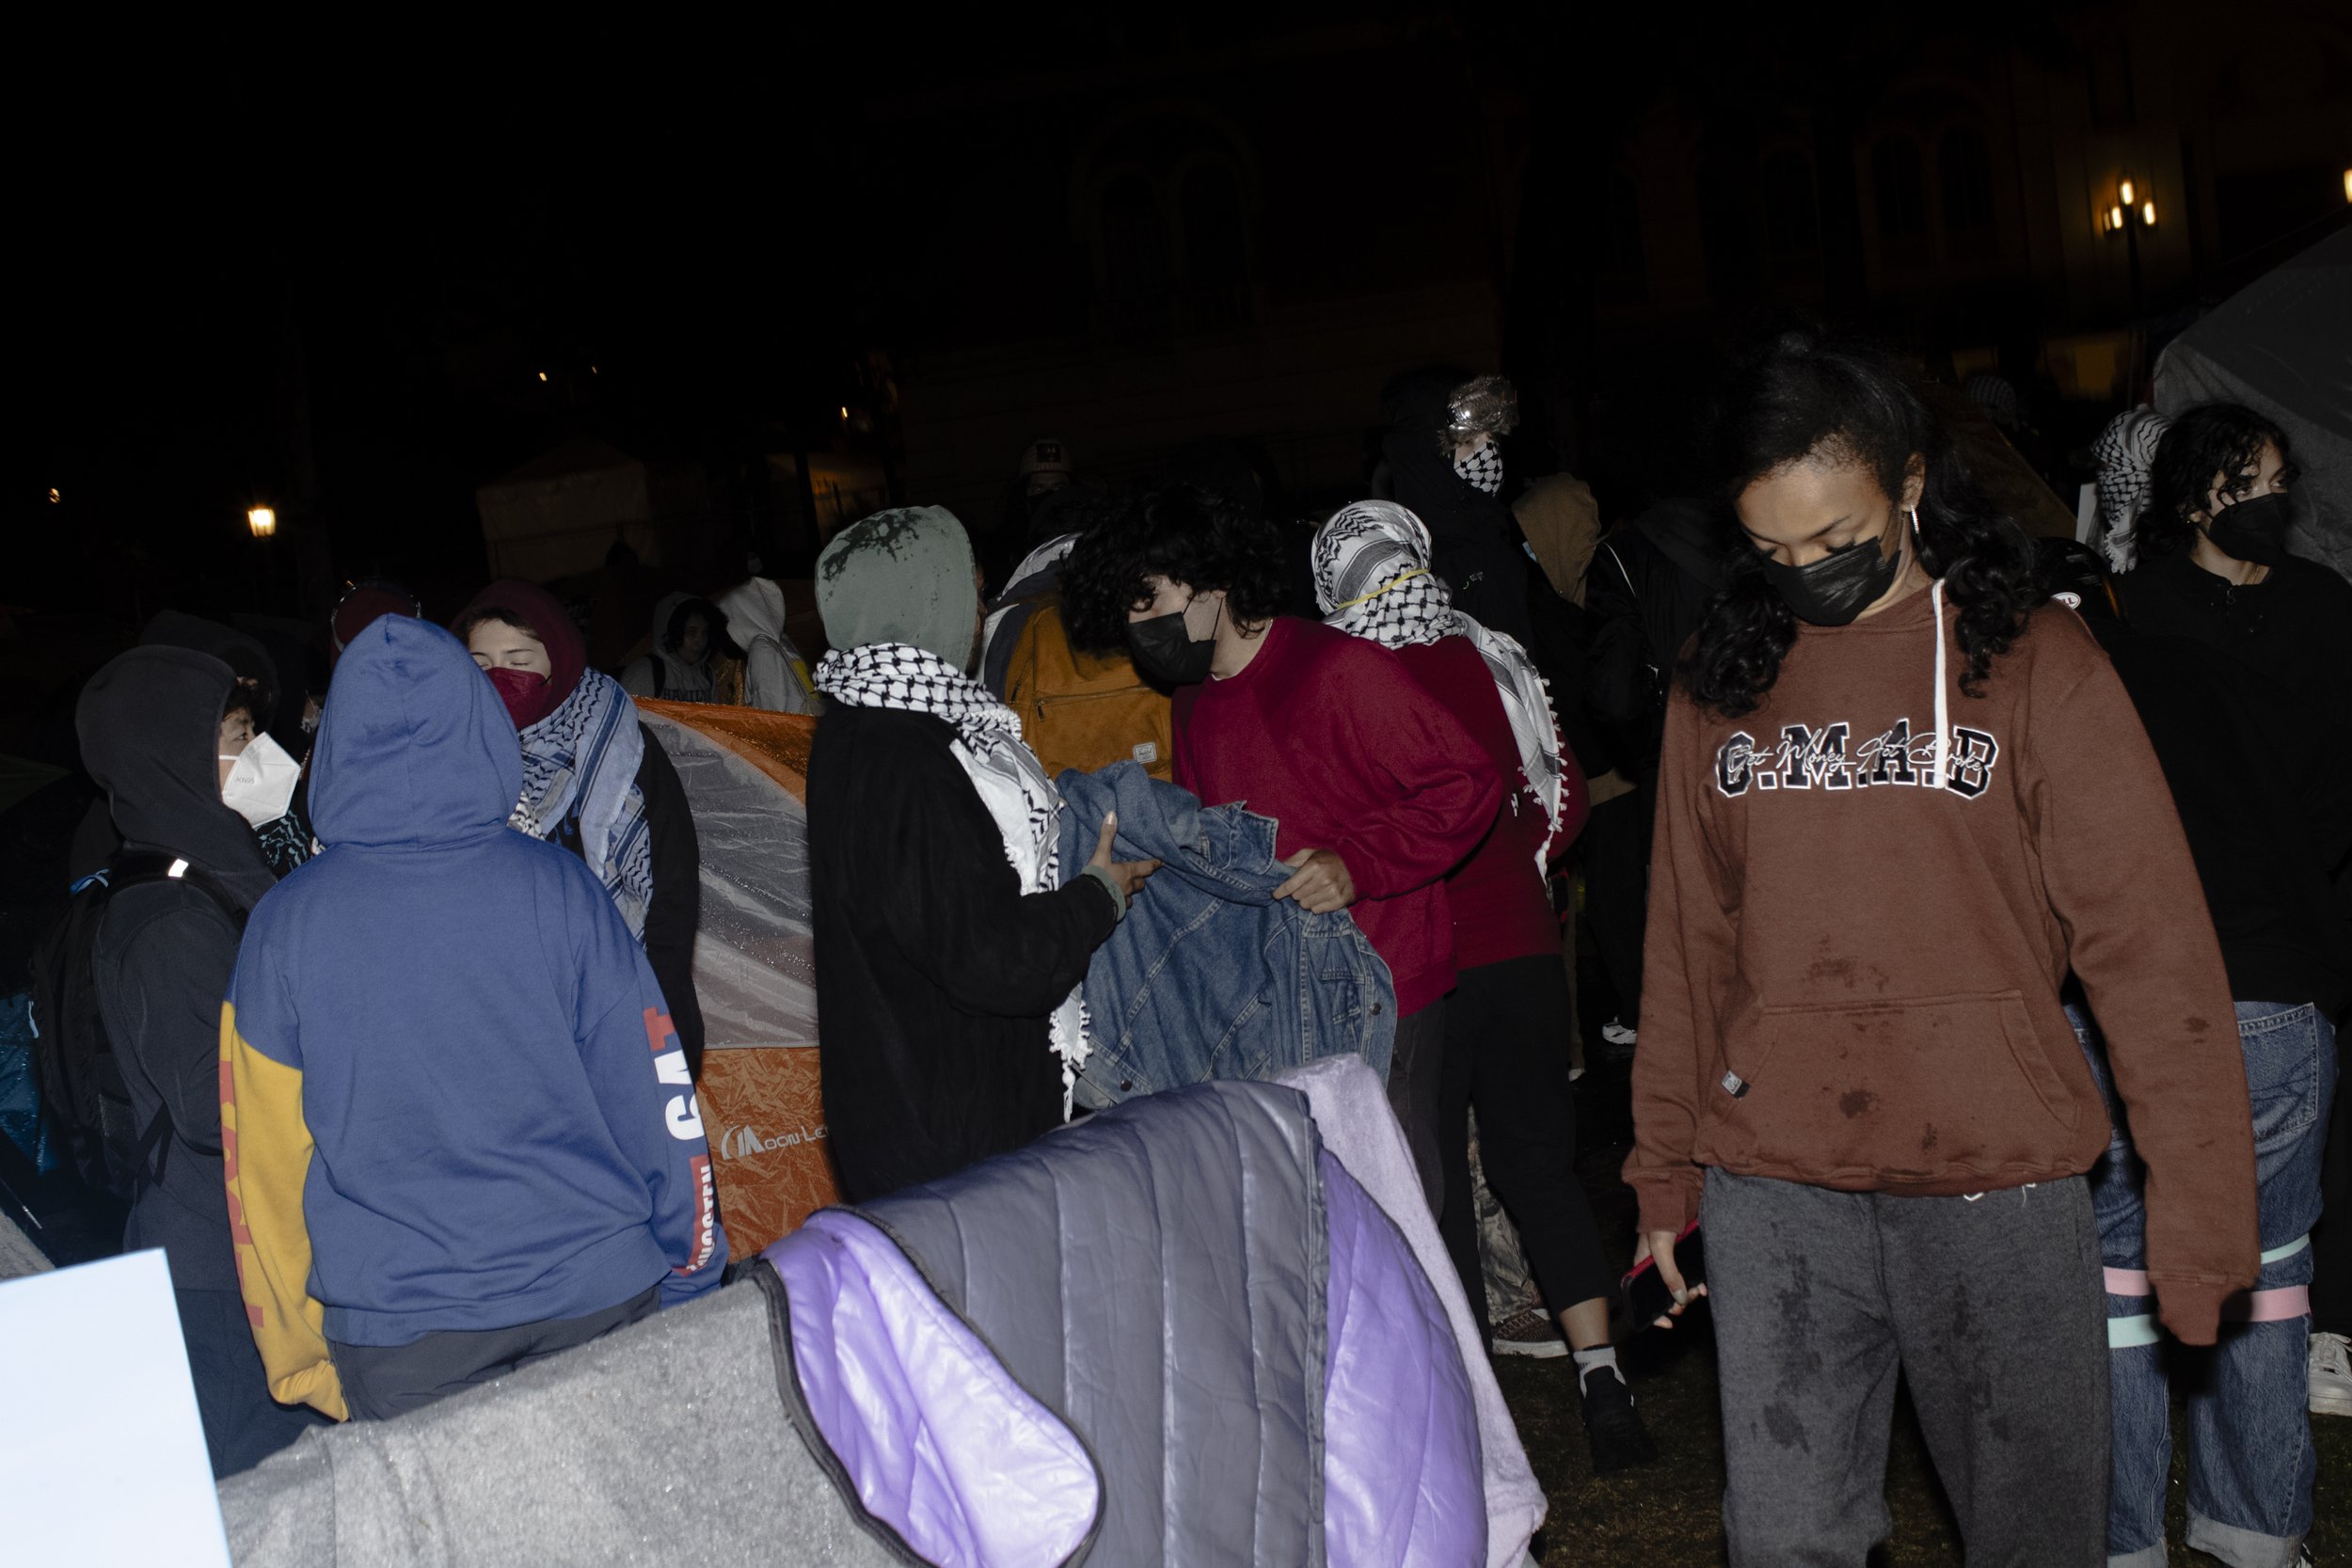  Protesters from the University of Southern California Divest from Death coalition emerge from their tent gathering supplies from their encampment after being told to disperse on Sunday, May 5, 2024, at The University of Southern California’s Alumni 